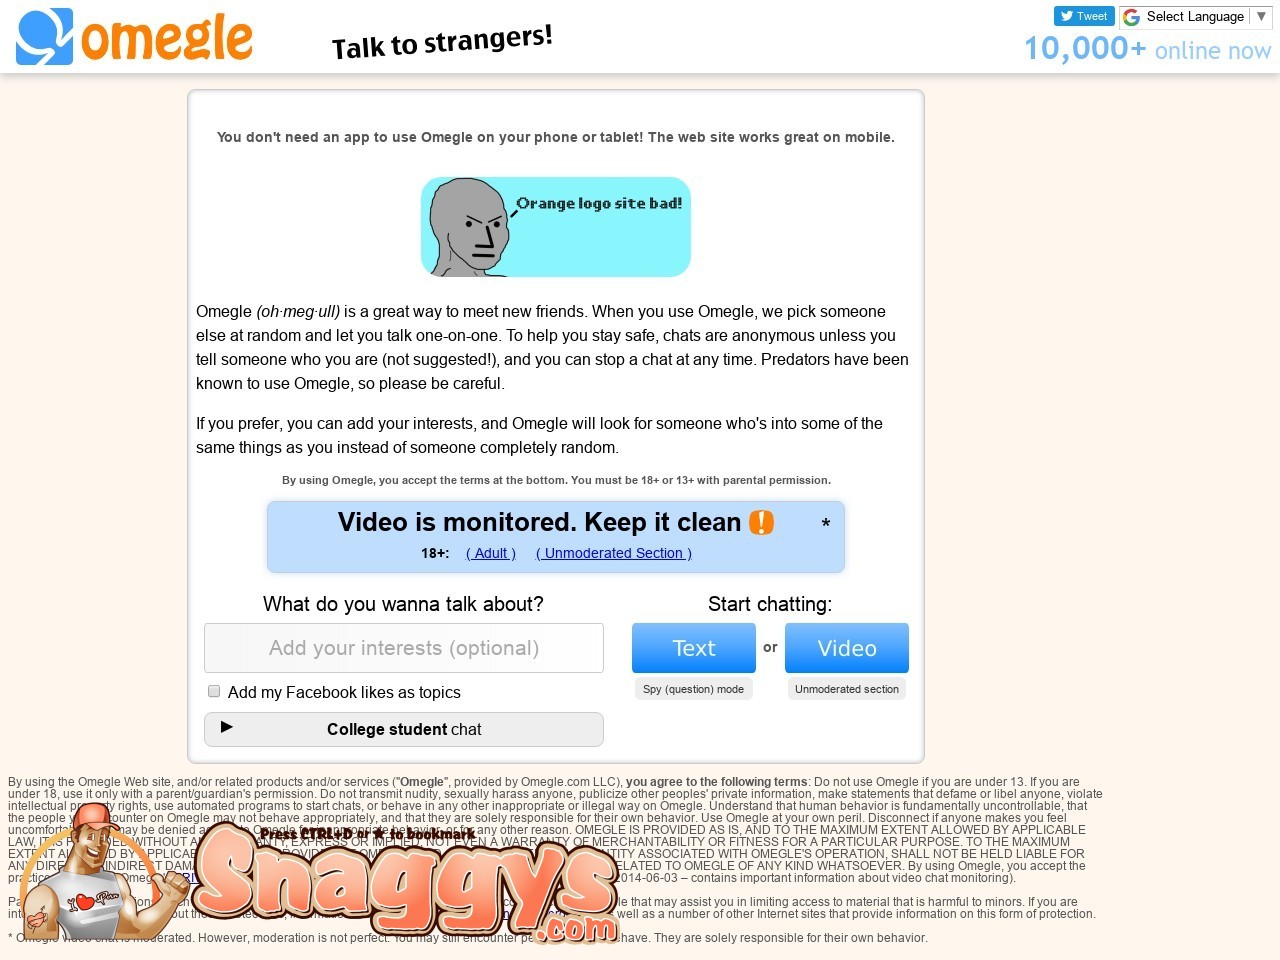 Omegle experience must